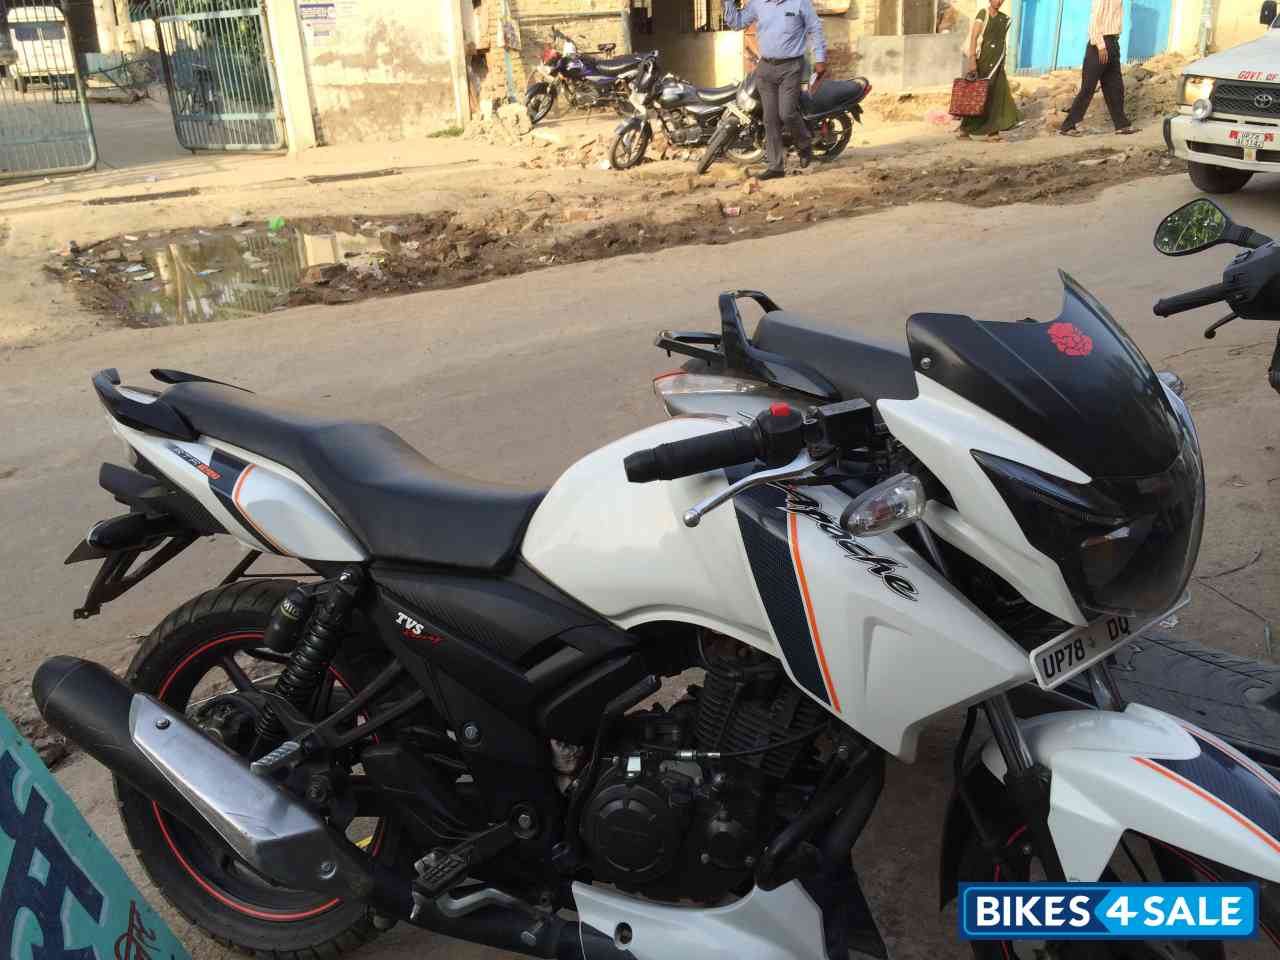 Used 2015 Model Tvs Apache Rtr 160 For Sale In Kanpur Nagar Id